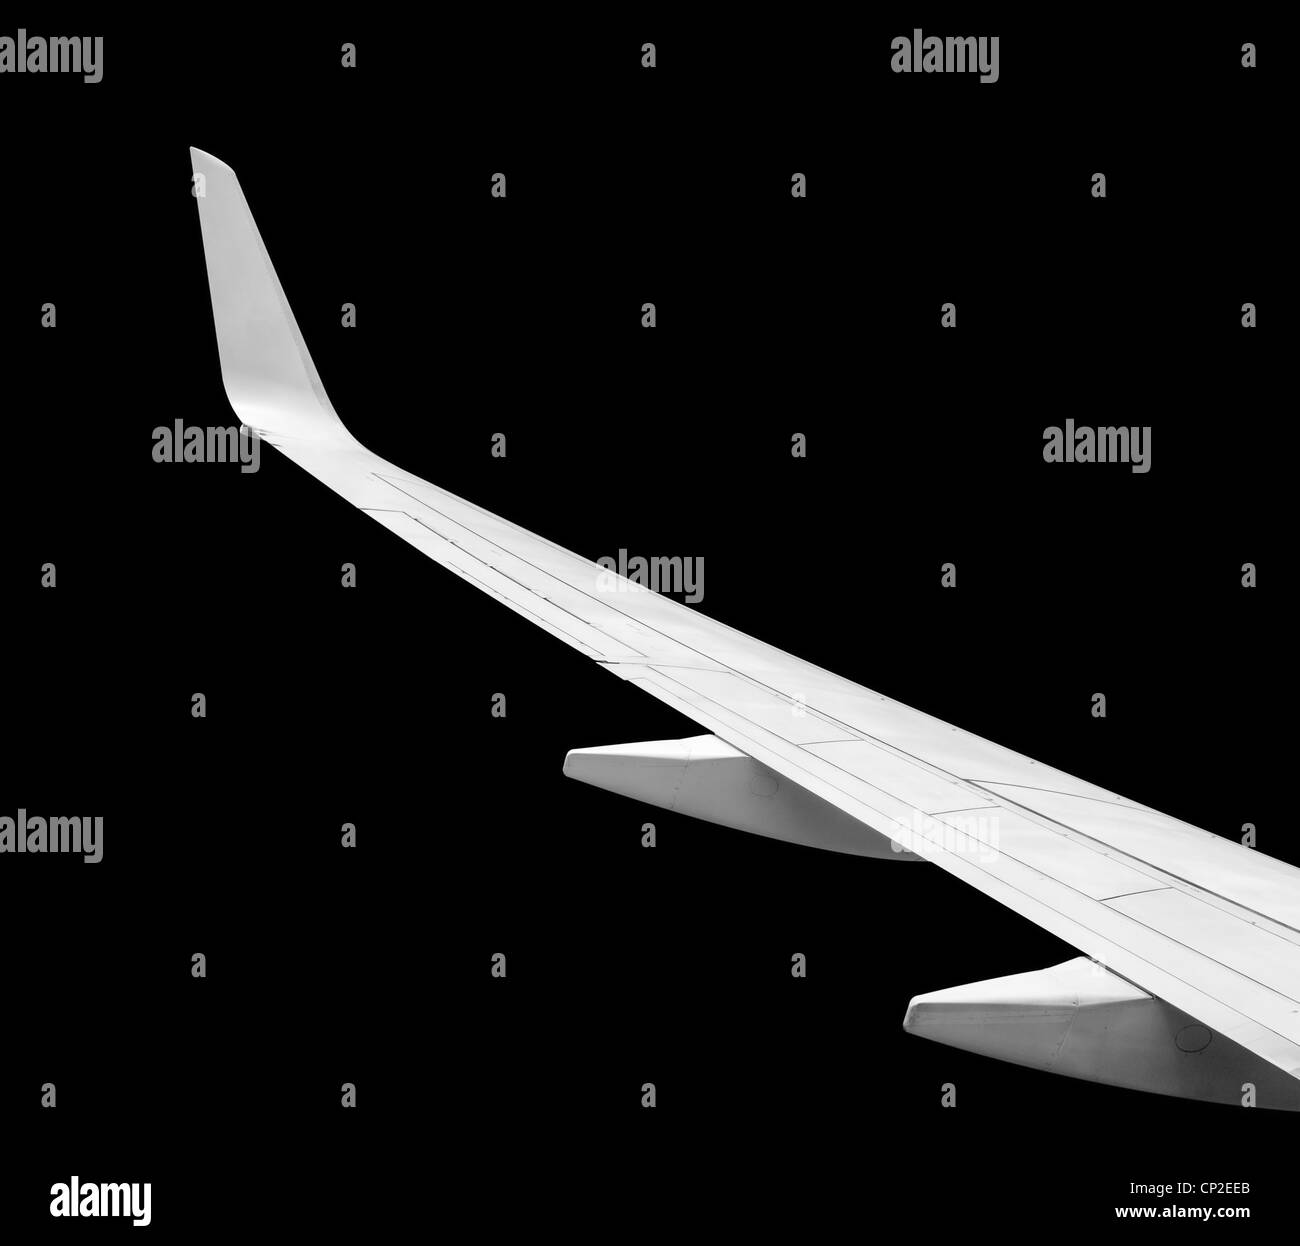 Isolated image of jet airplane wing. Stock Photo